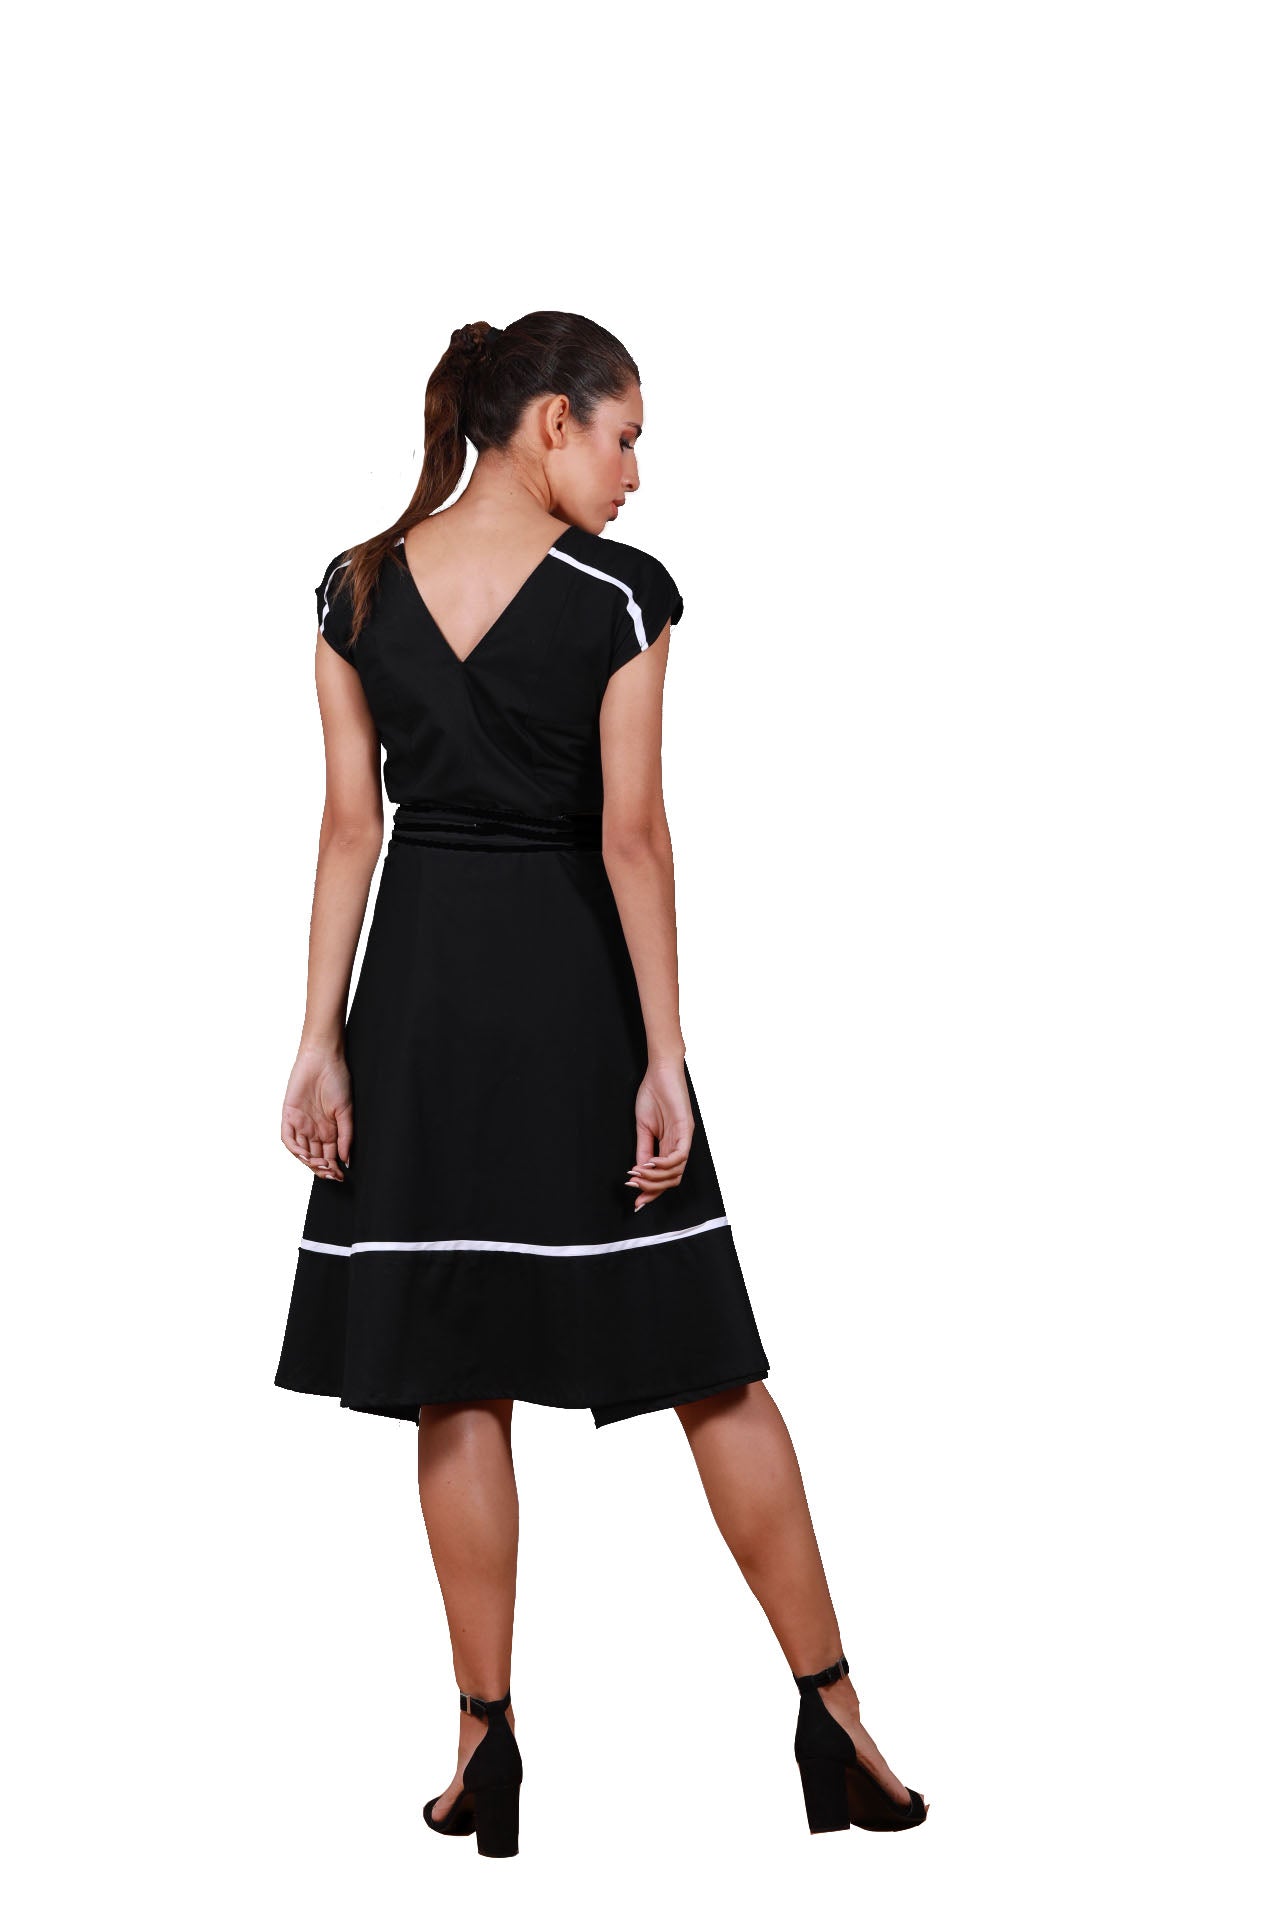 Wrap dress, two fronts, with white bias on shoulder yoke and skirt.